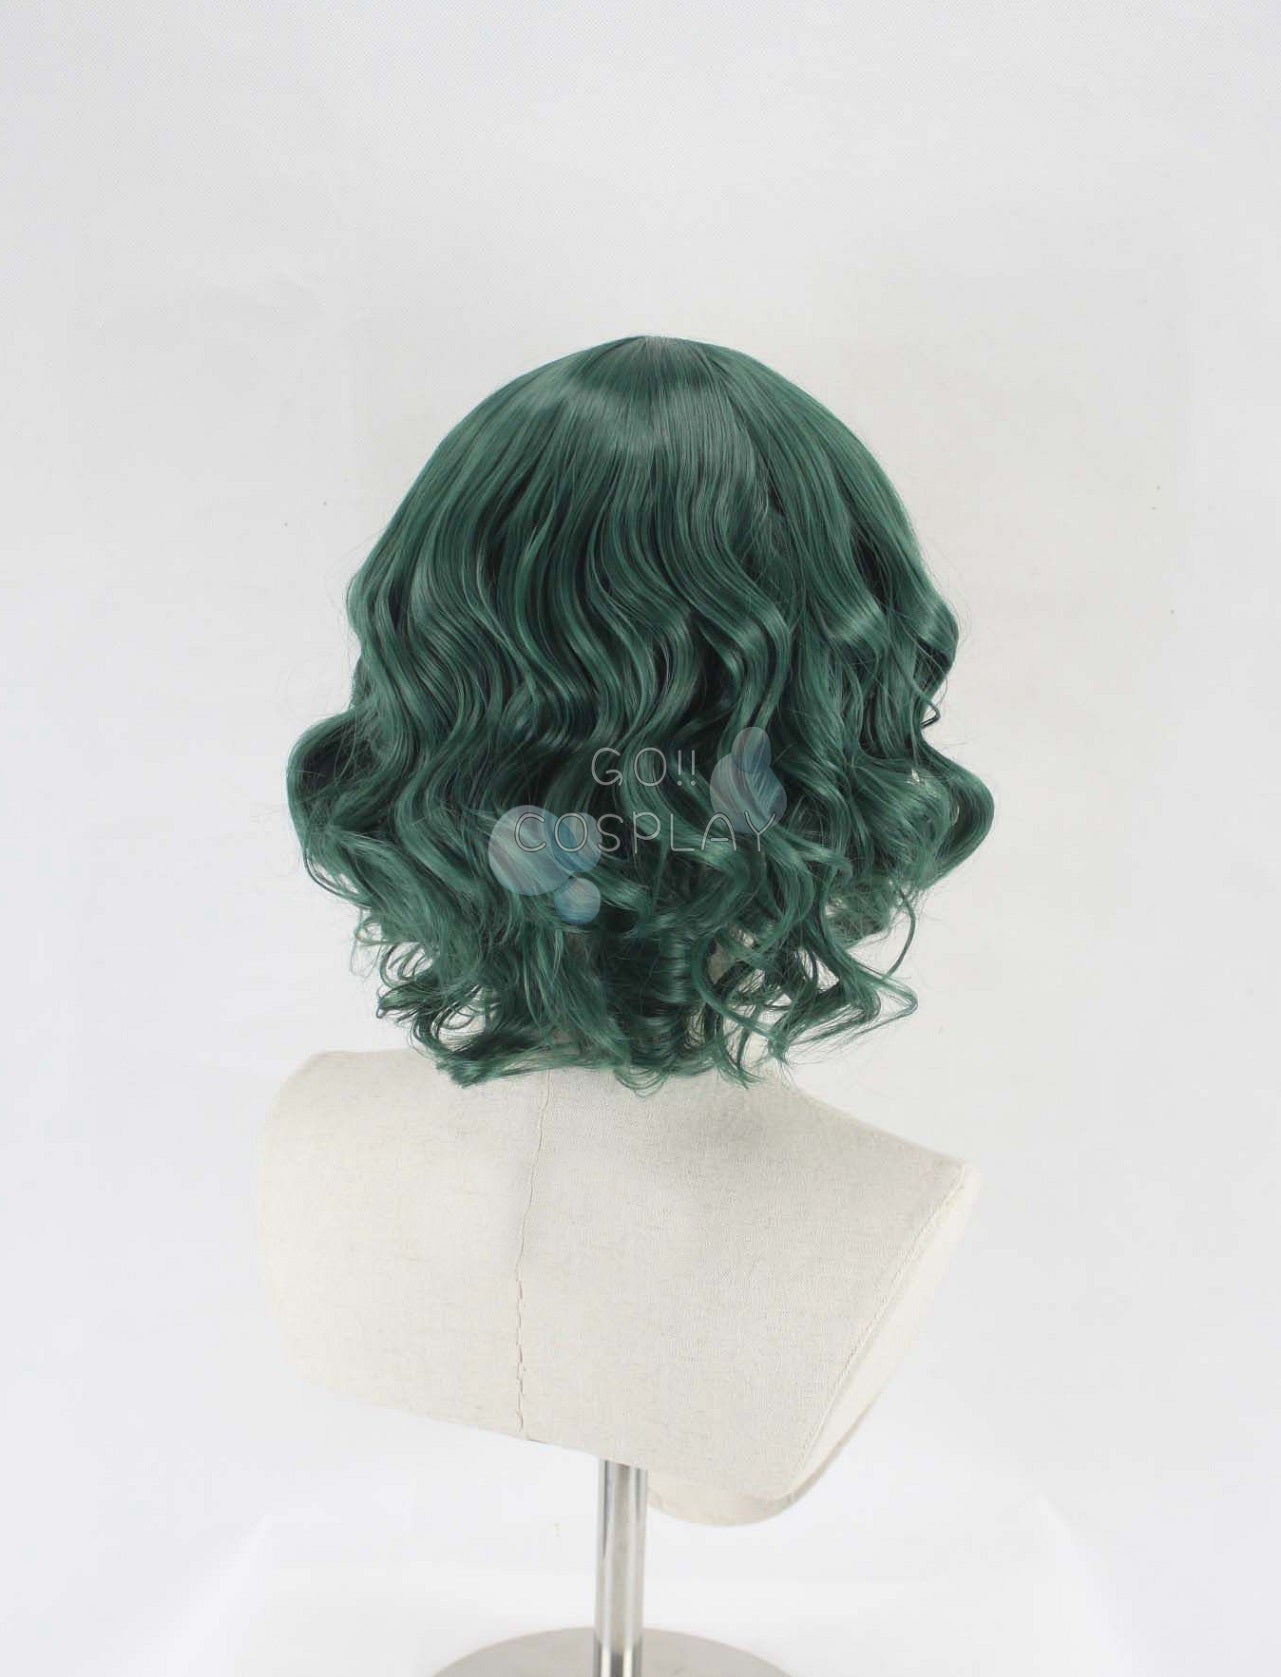 Queen Eclipsa Cosplay Wig for Sale